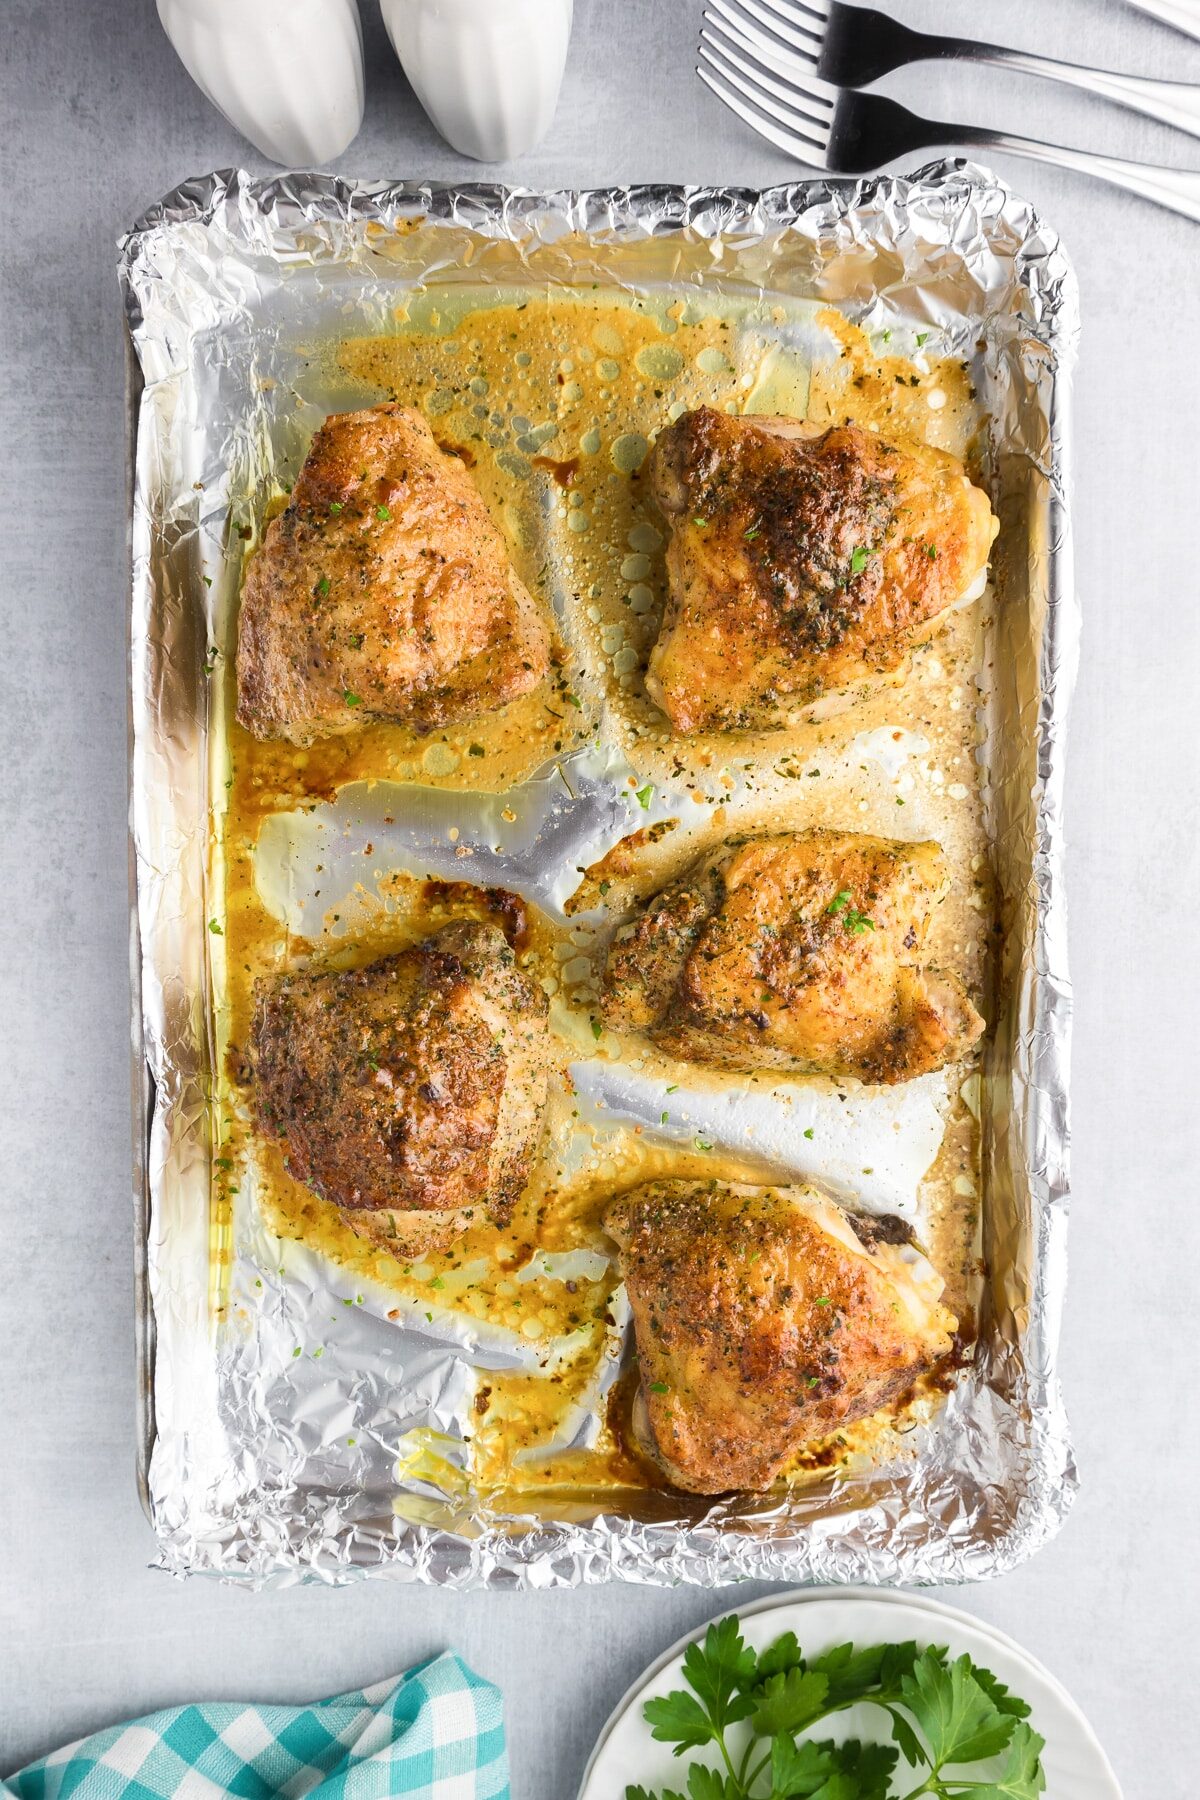 Crispy brown baked chicken thighs in a ranch seasoning on a foil-lined baking tray after baking.